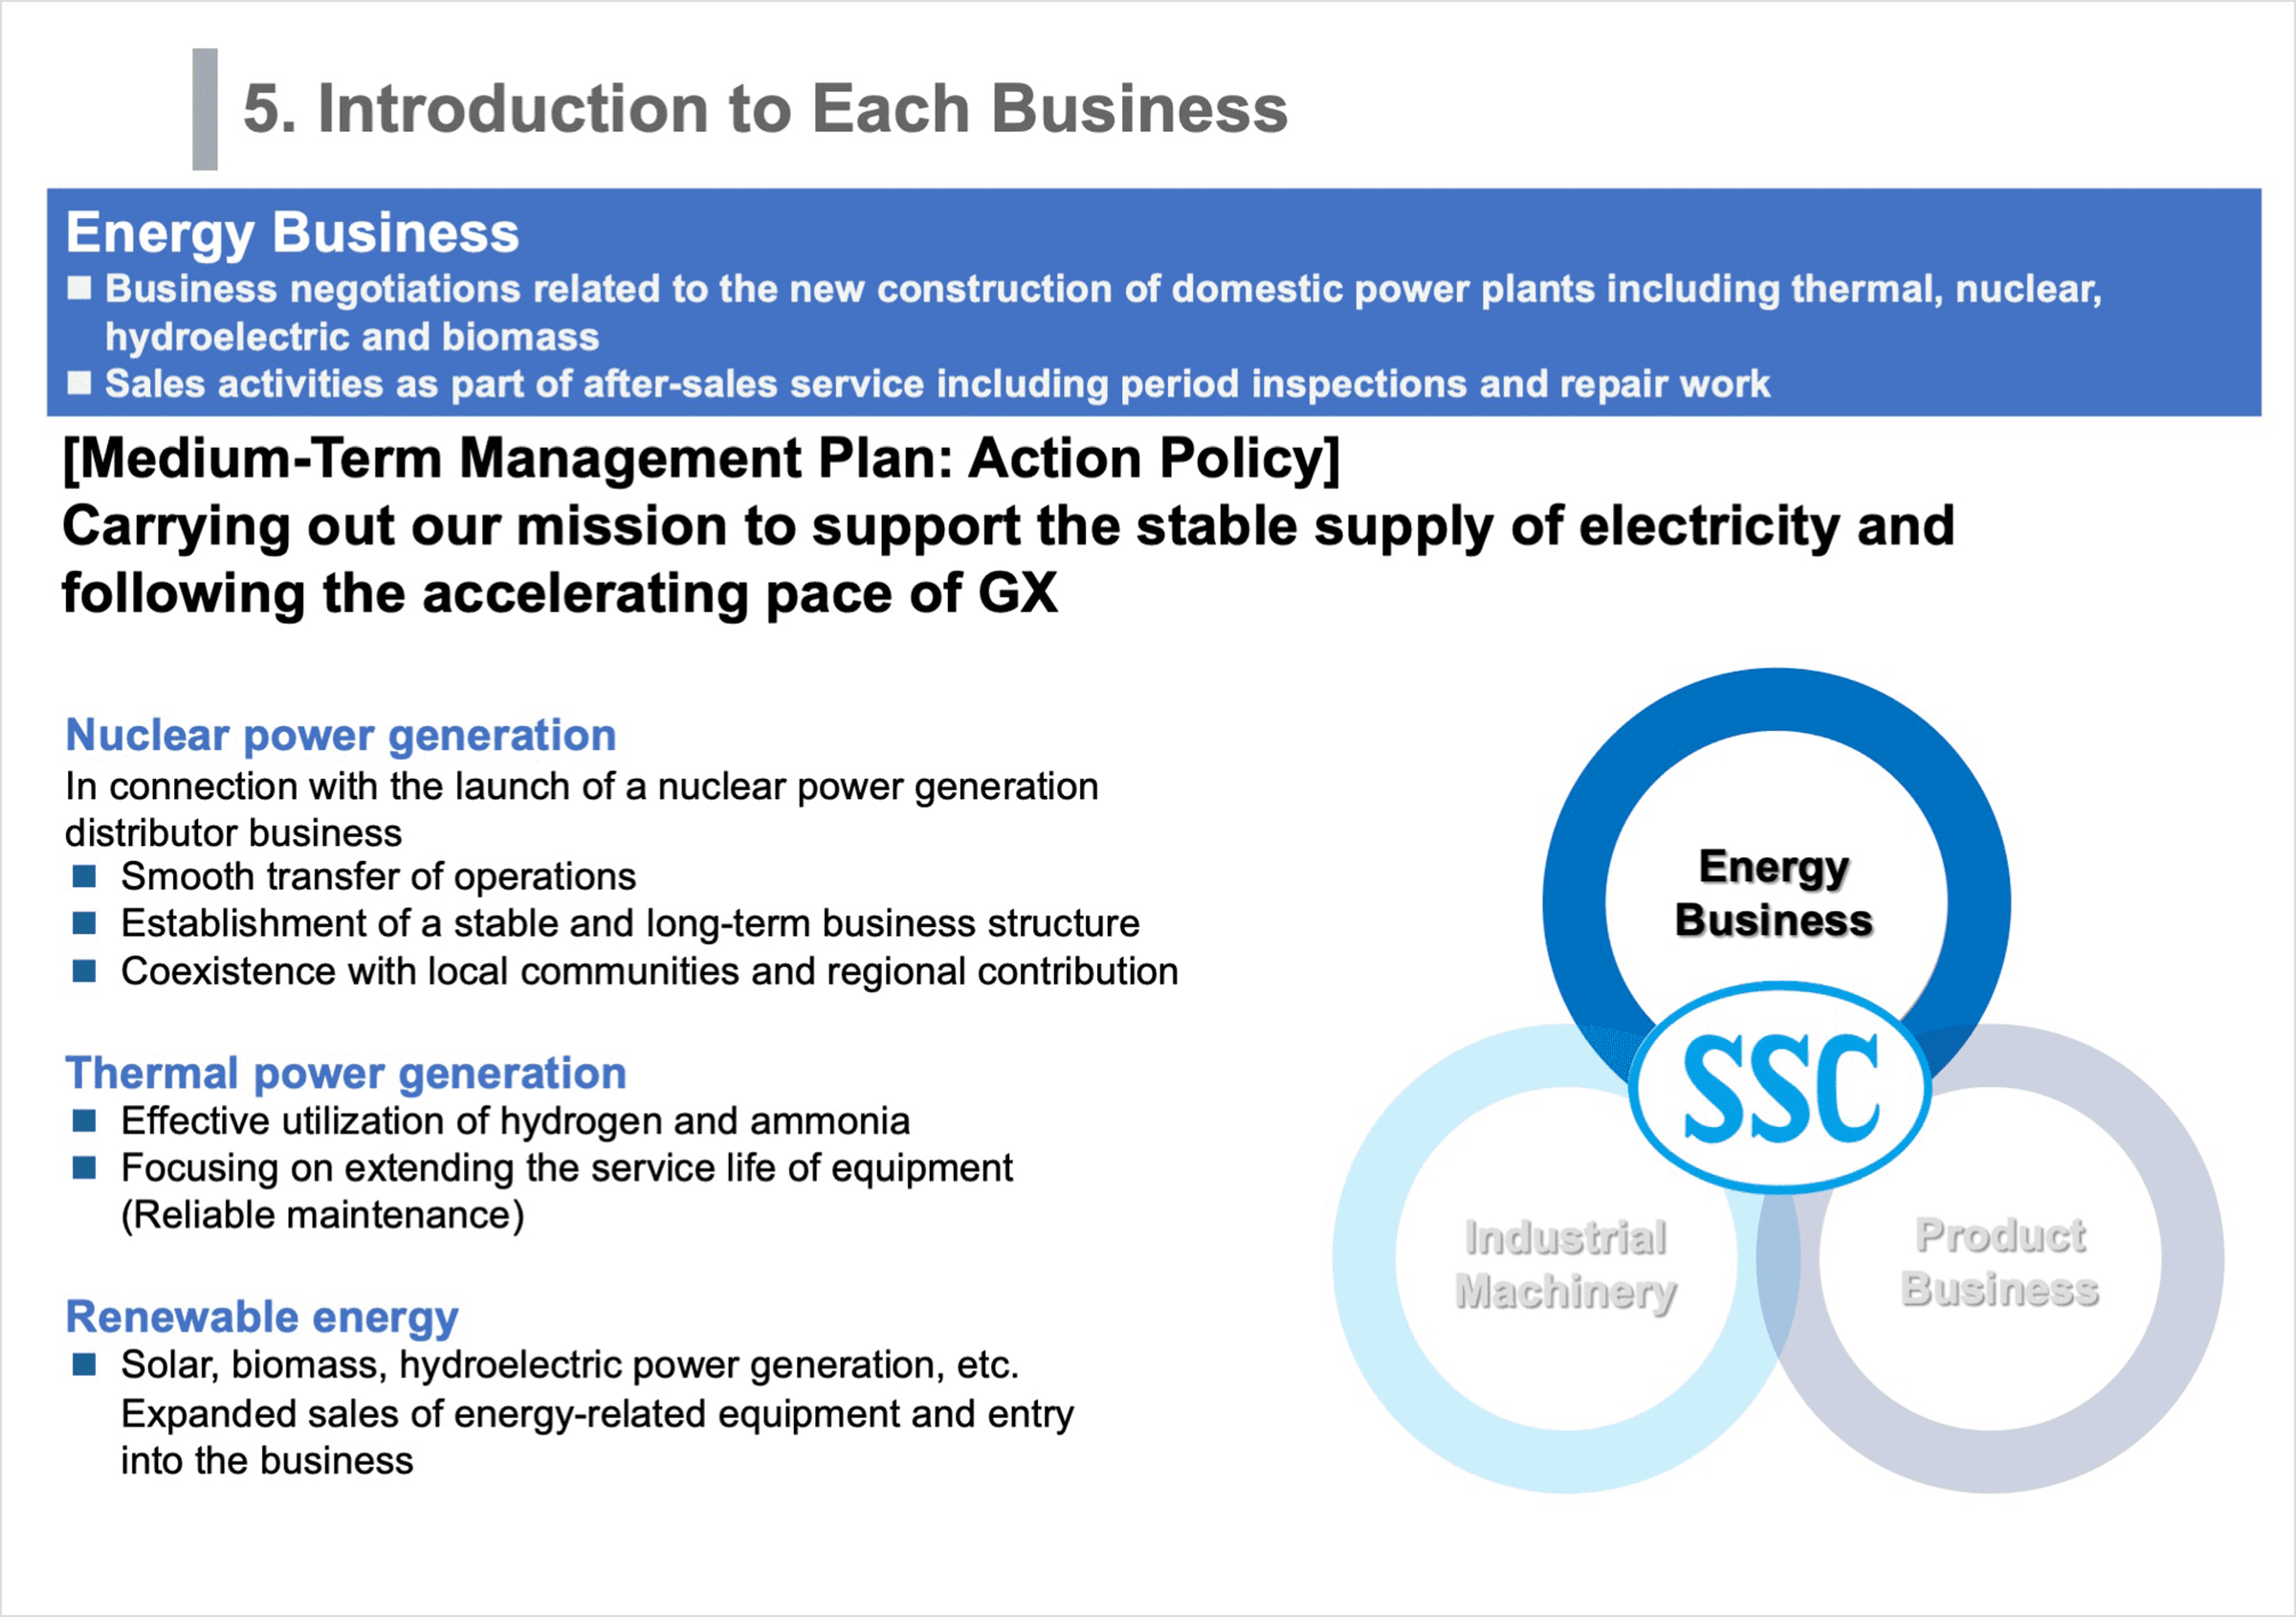 Introduction to Each Business : Energy Business